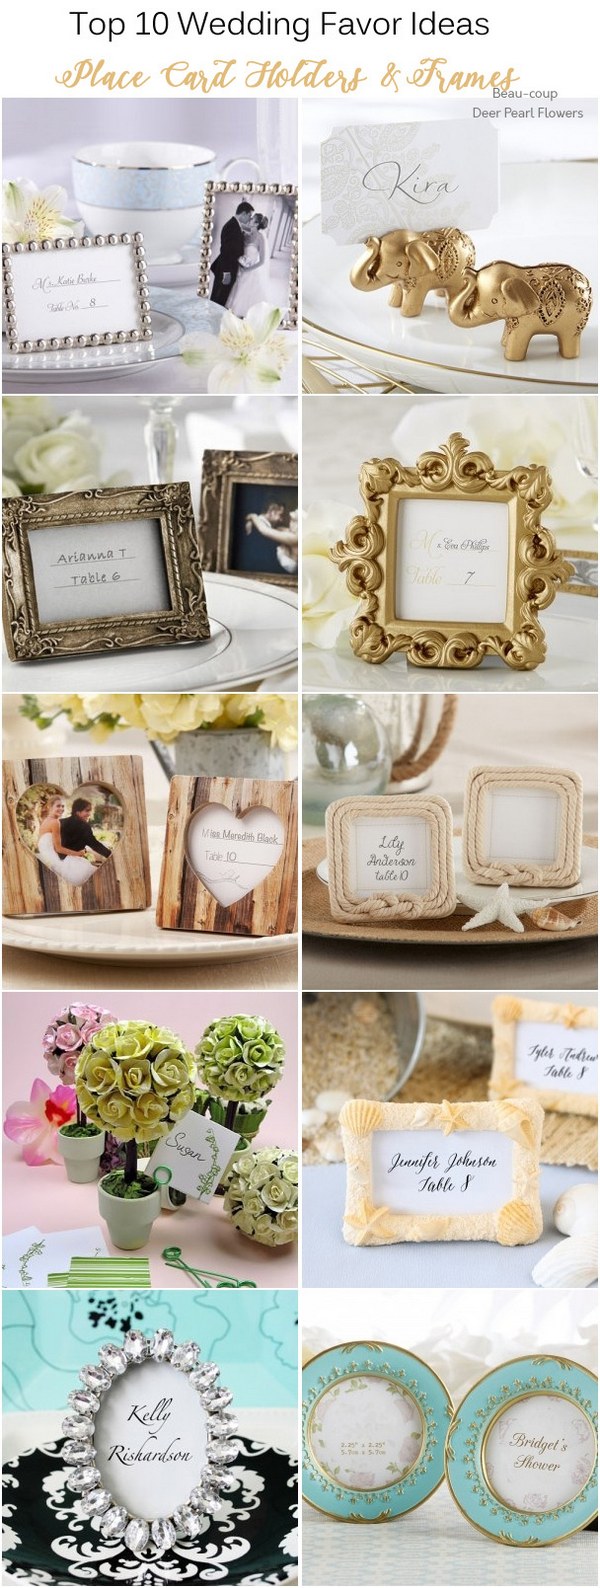 96 Beautifully Beaded Gold Wedding Place Card Holder Photo Frame Favors 